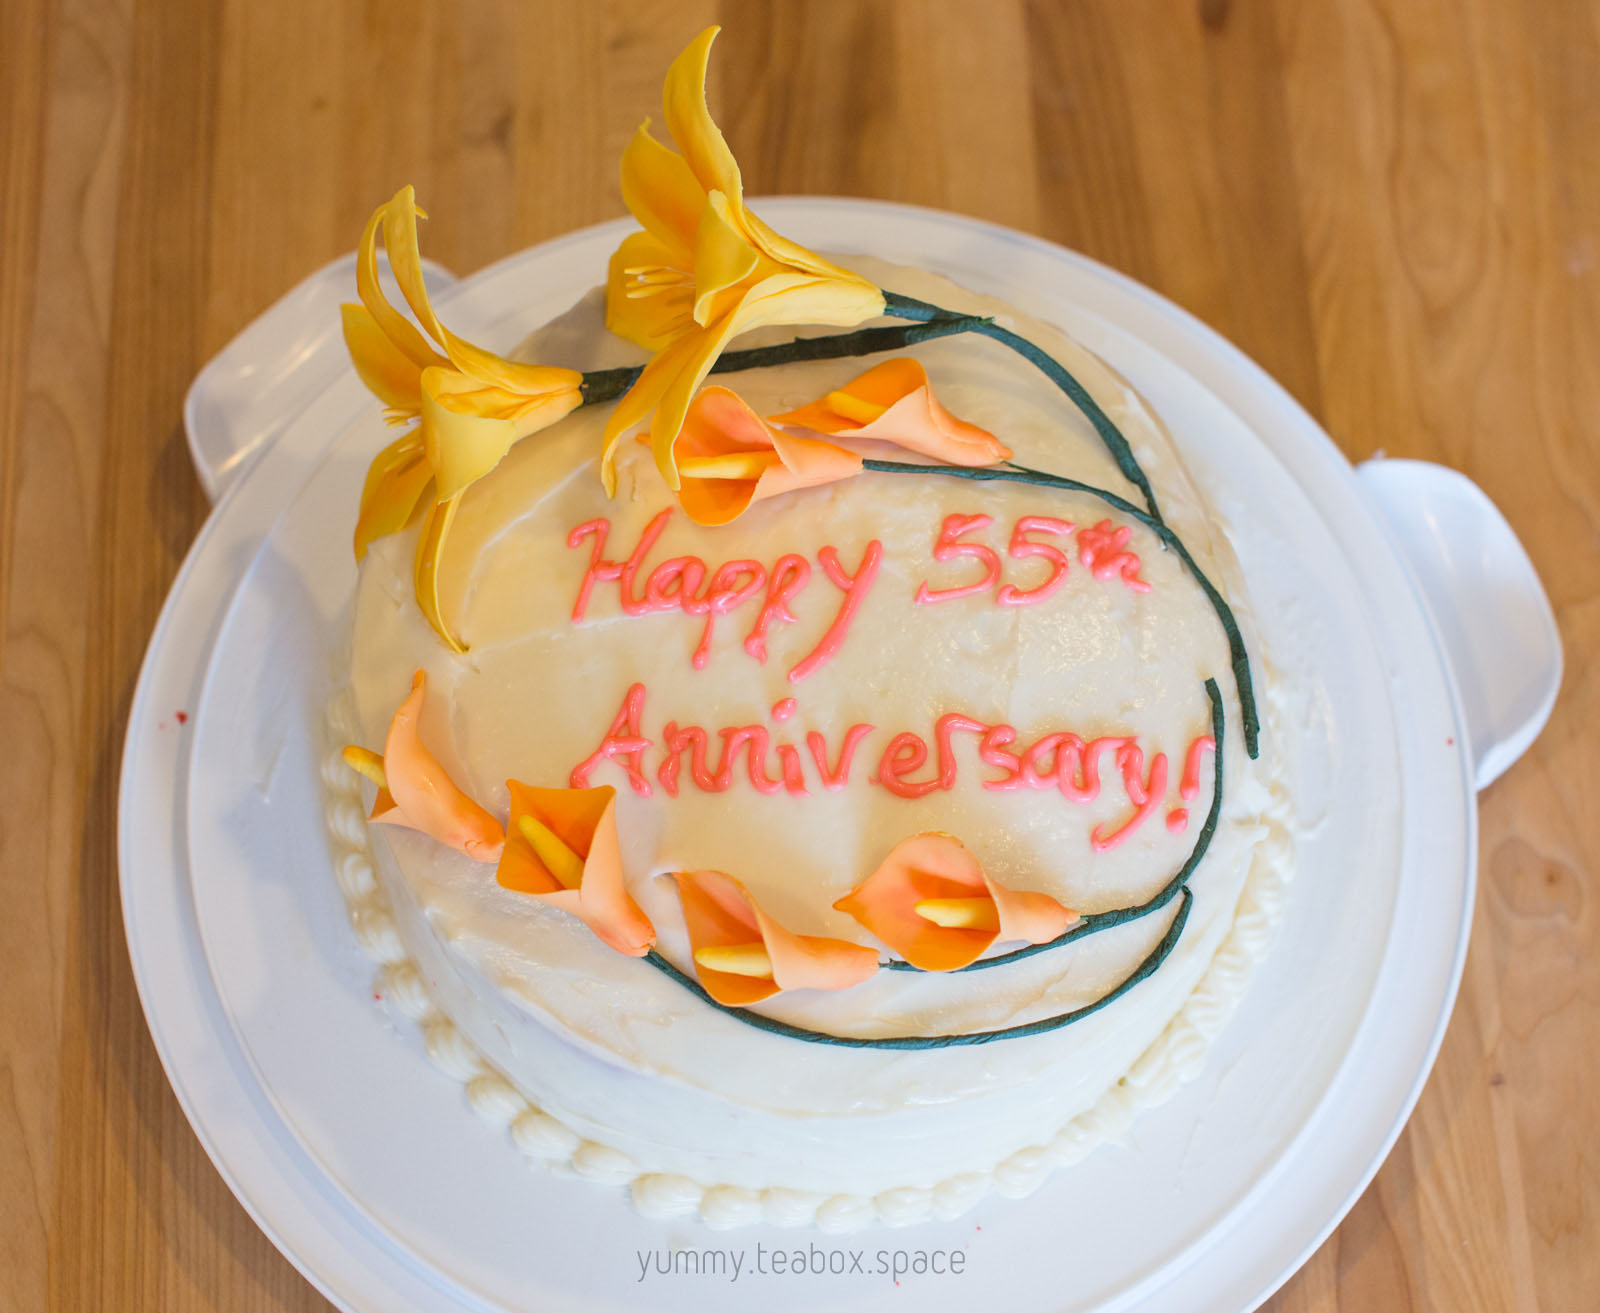 Round cake with white frosting and decorated with yellow lilies and orange calla lilies. The center says Happy 55th Anniversary.